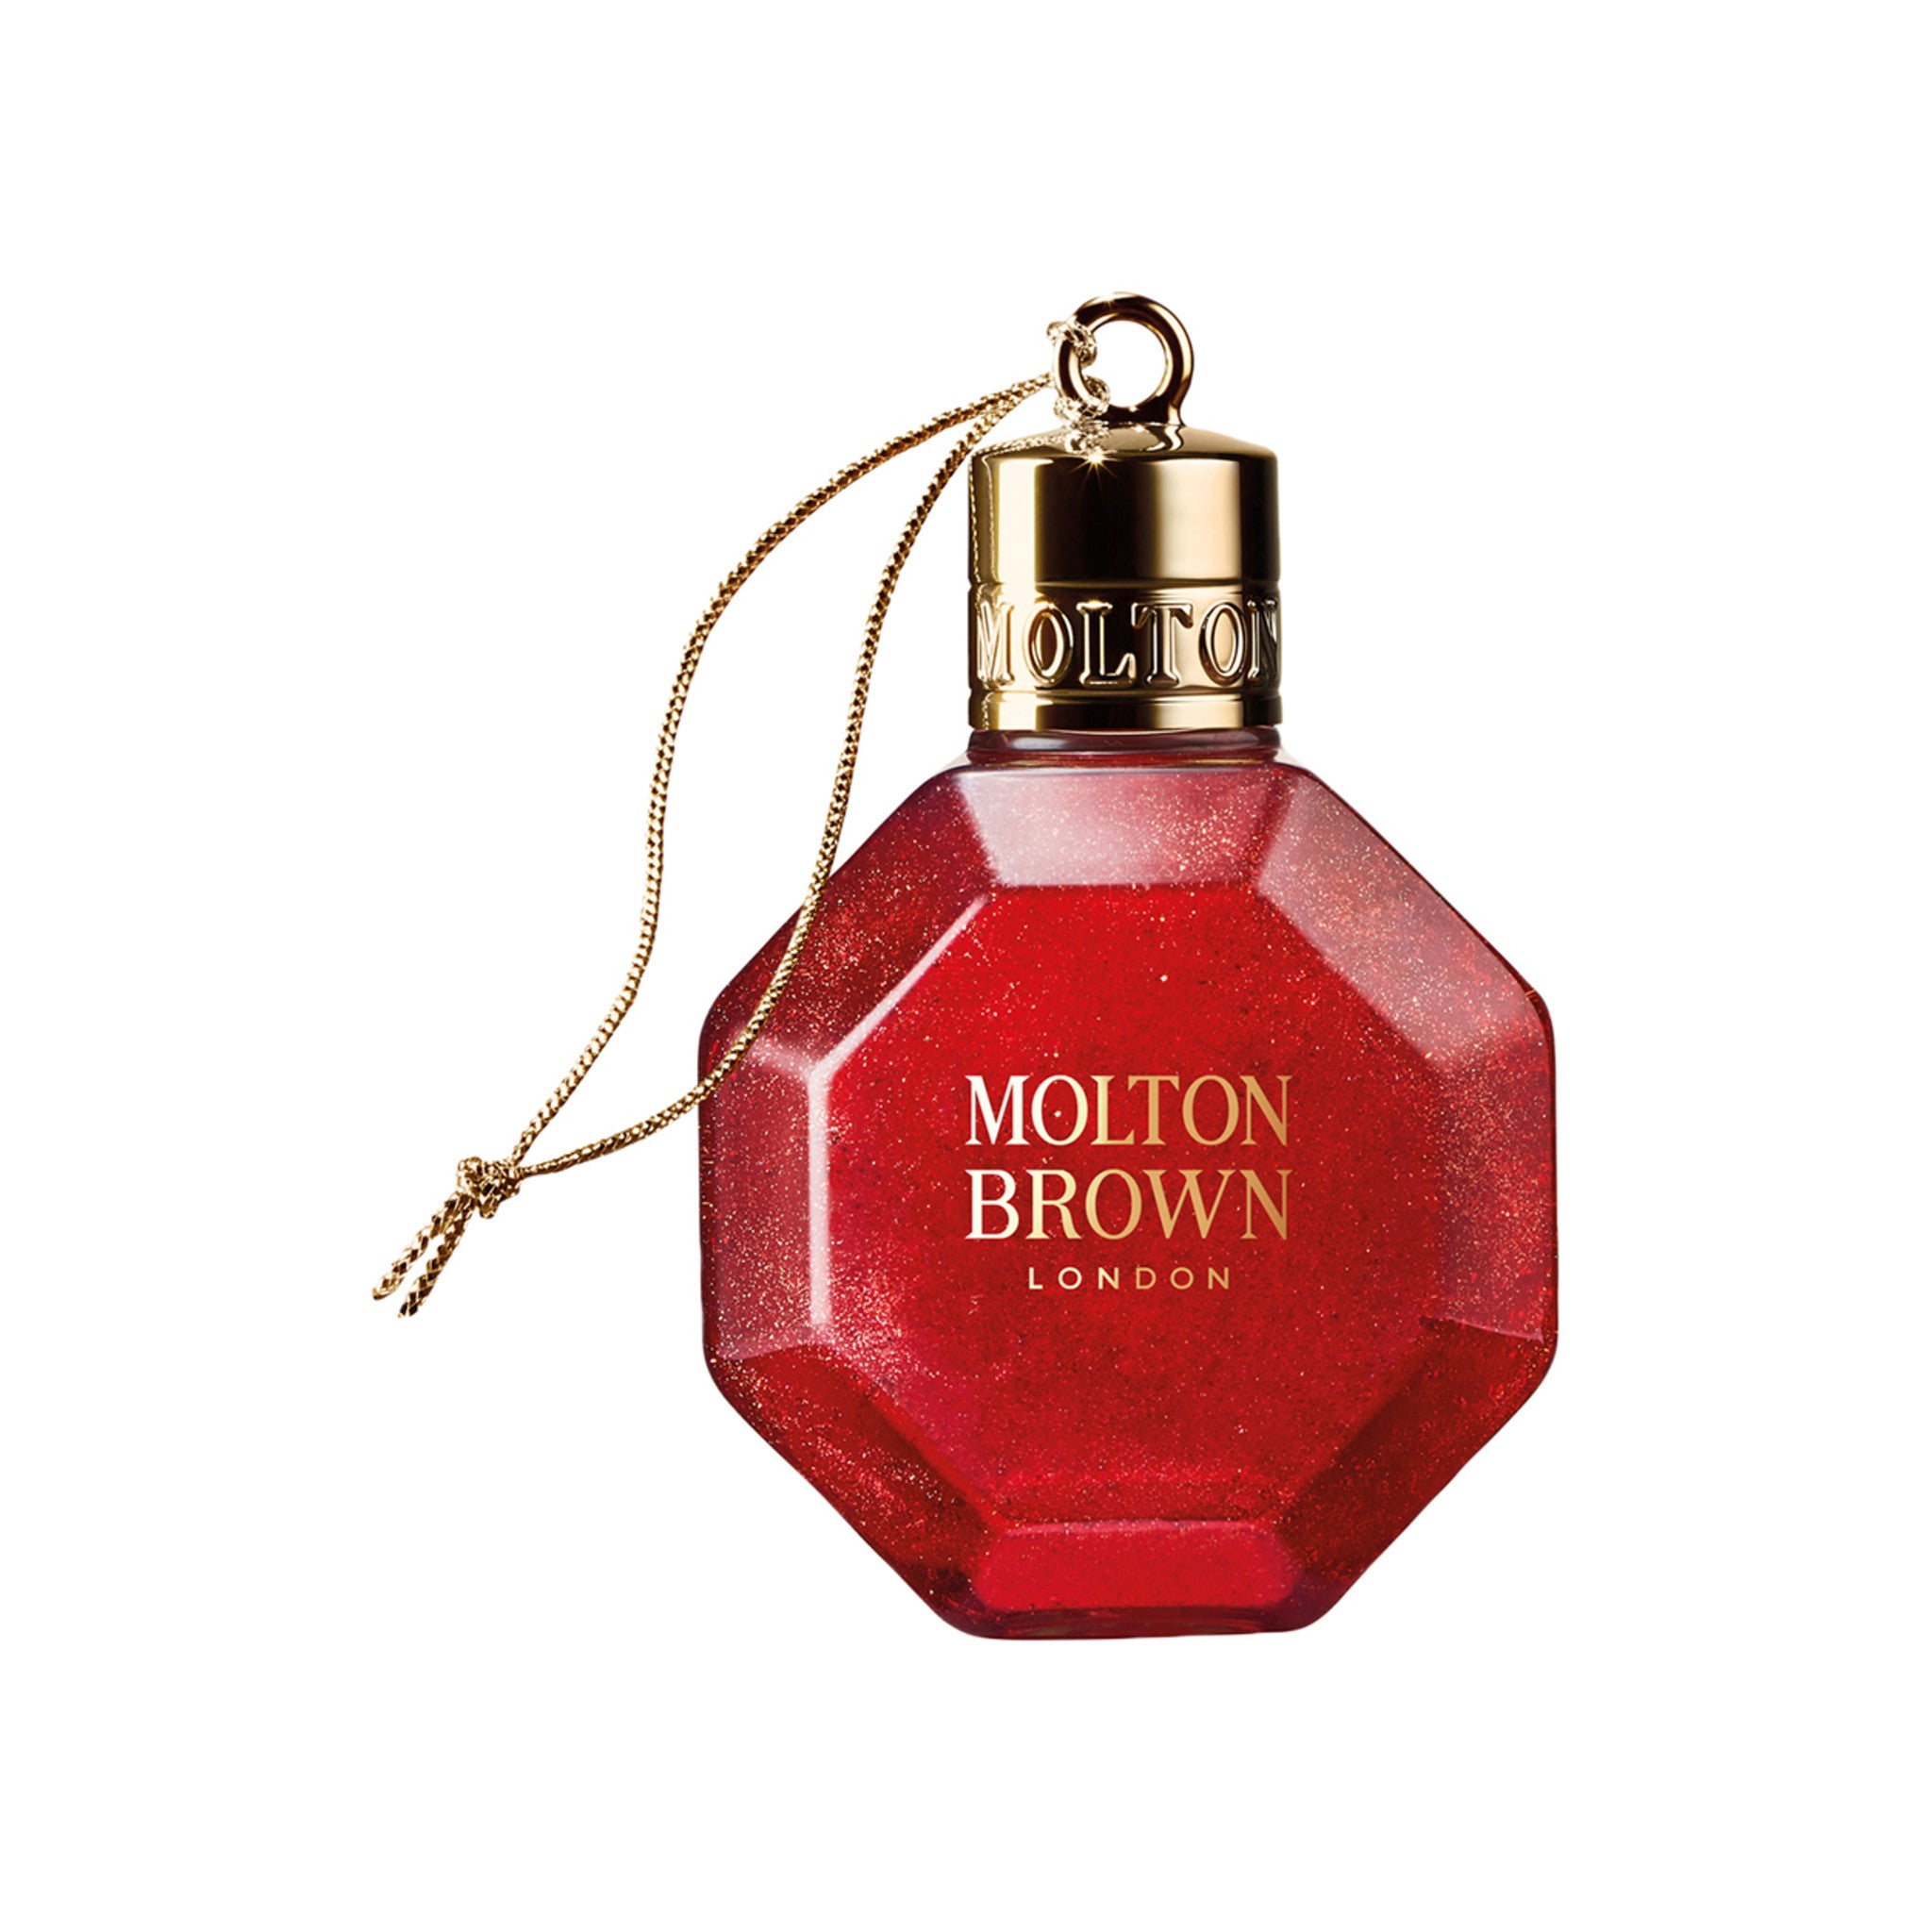 Molton Brown Merry Berries and Mimosa Festive Bauble (Limited Edition) main image.